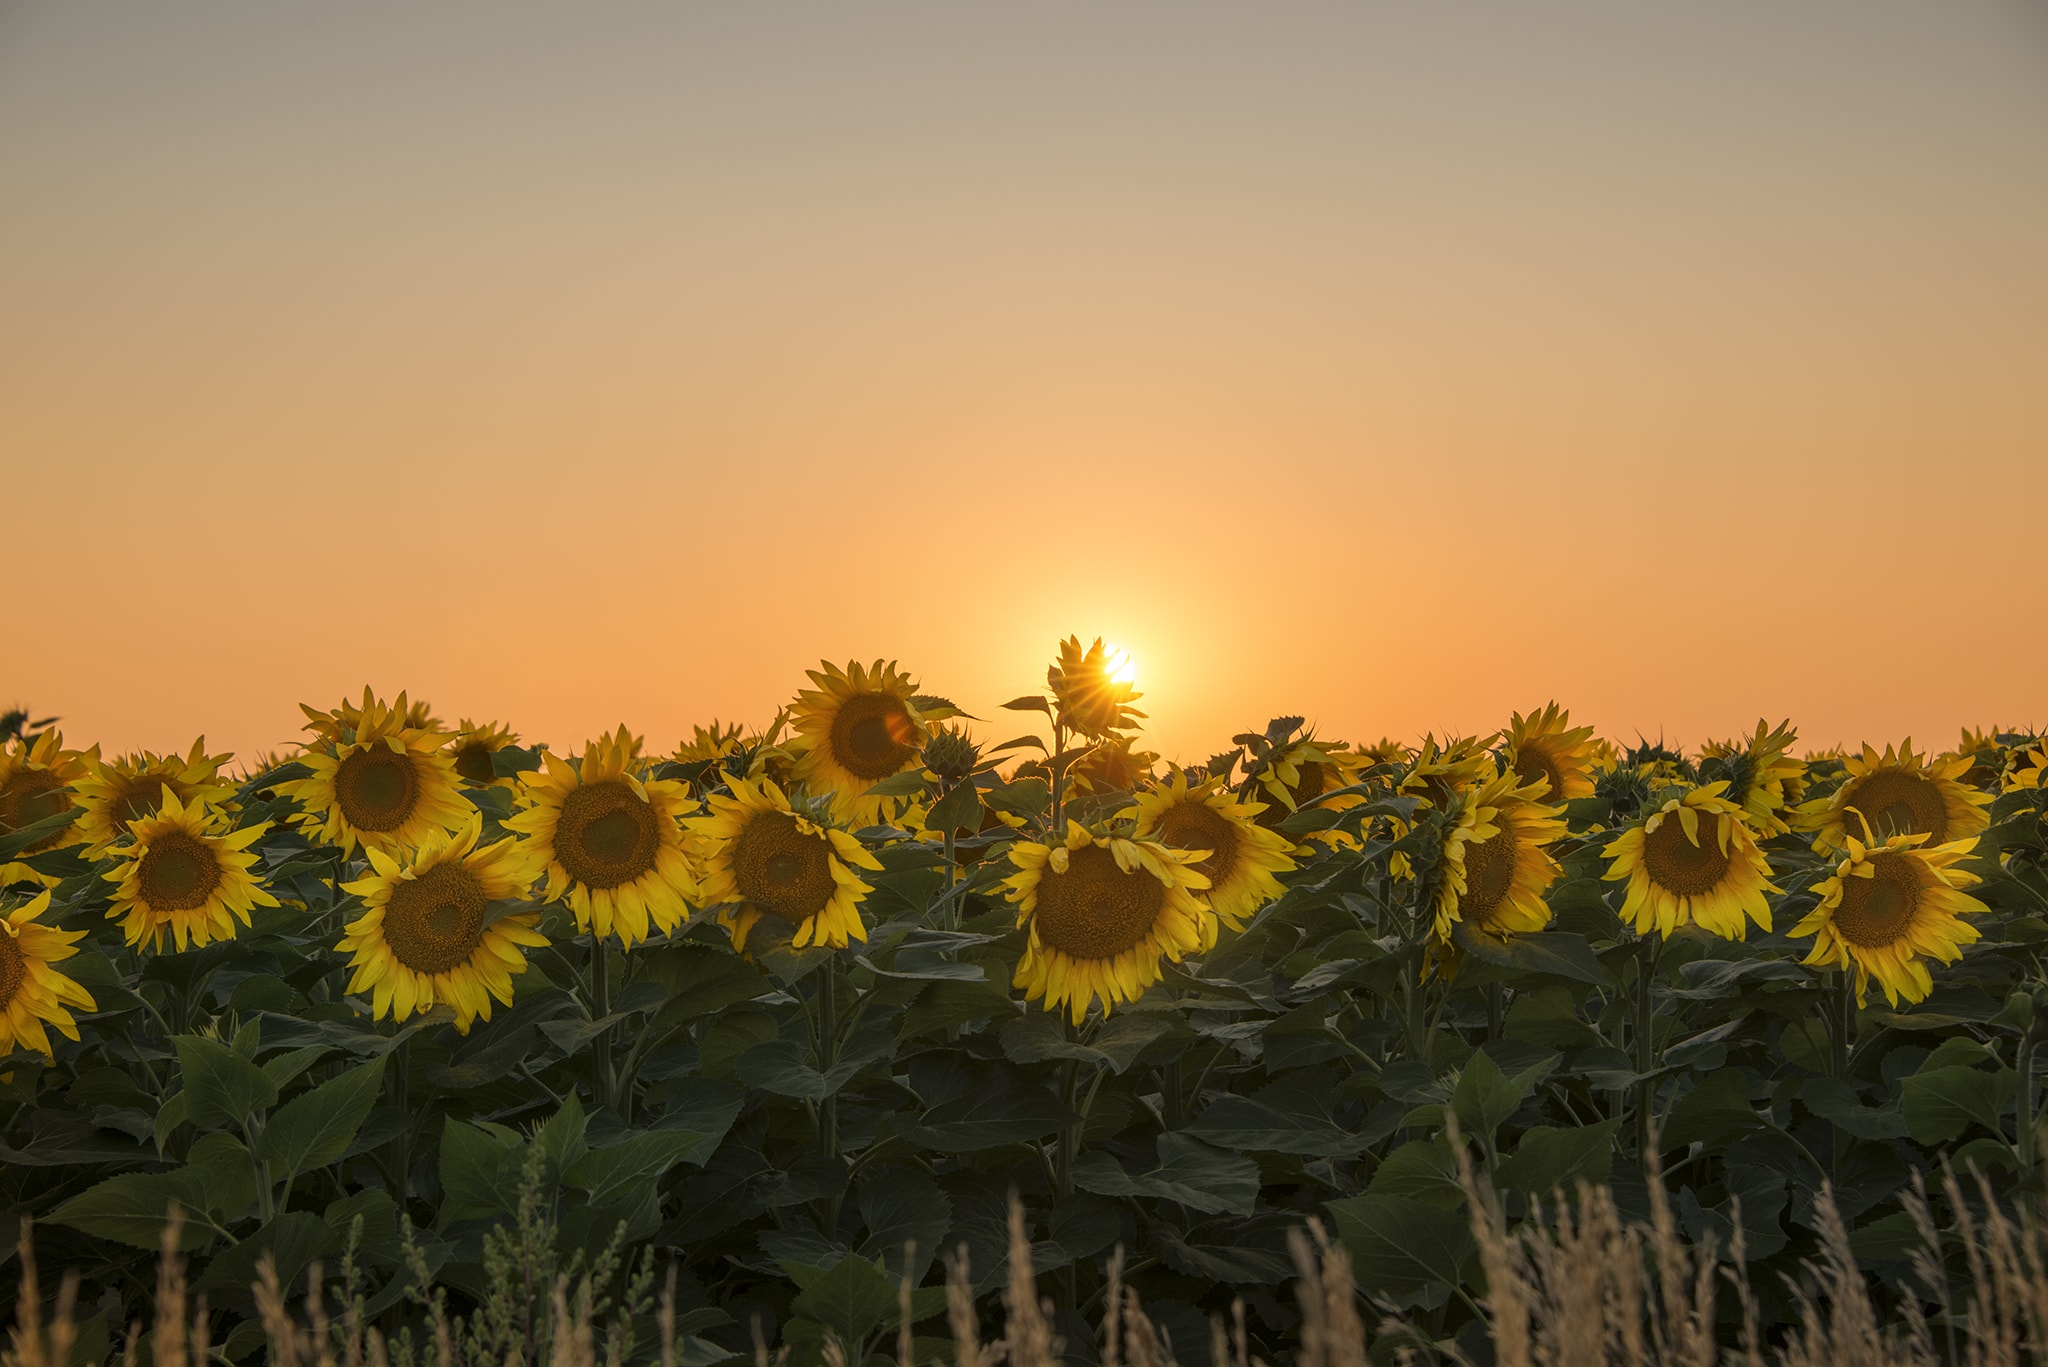 Field of yellow sunflowers picture